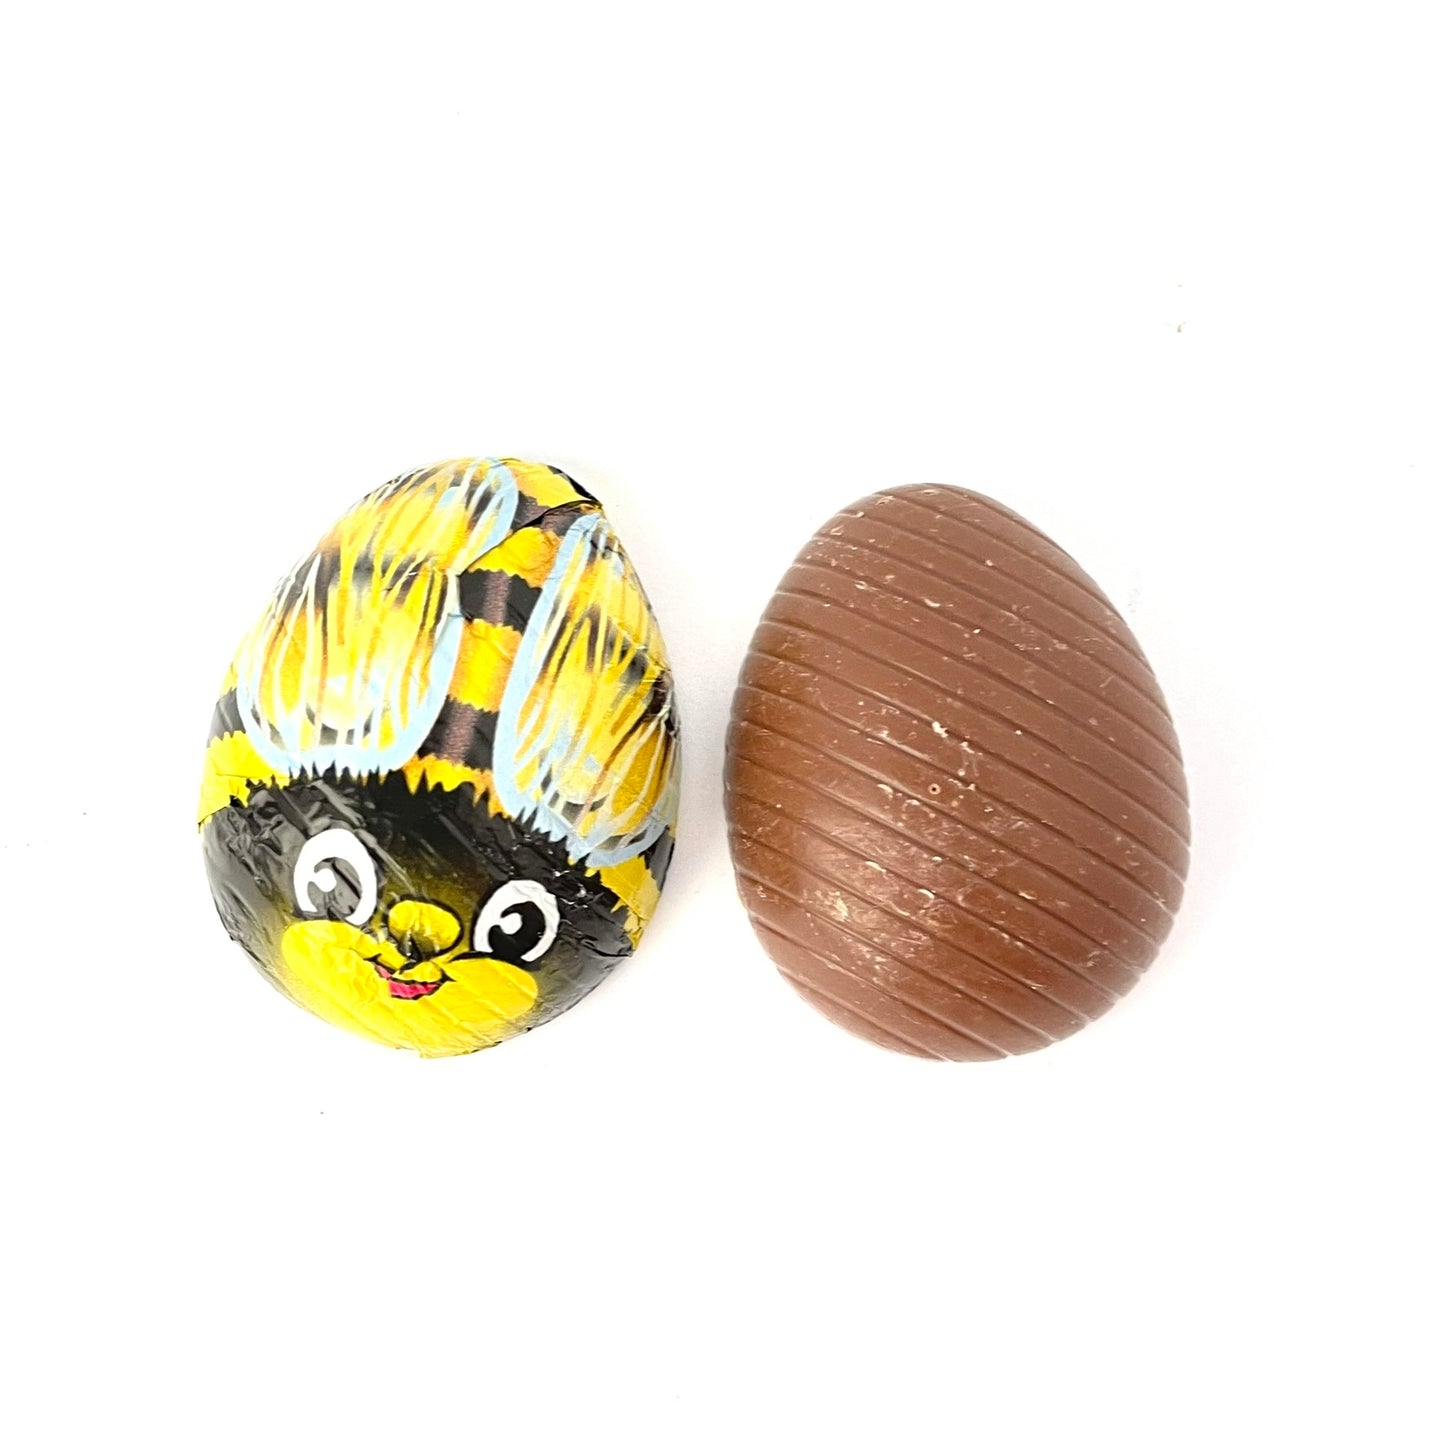 Foil-Wrapped Milk Chocolate Bees